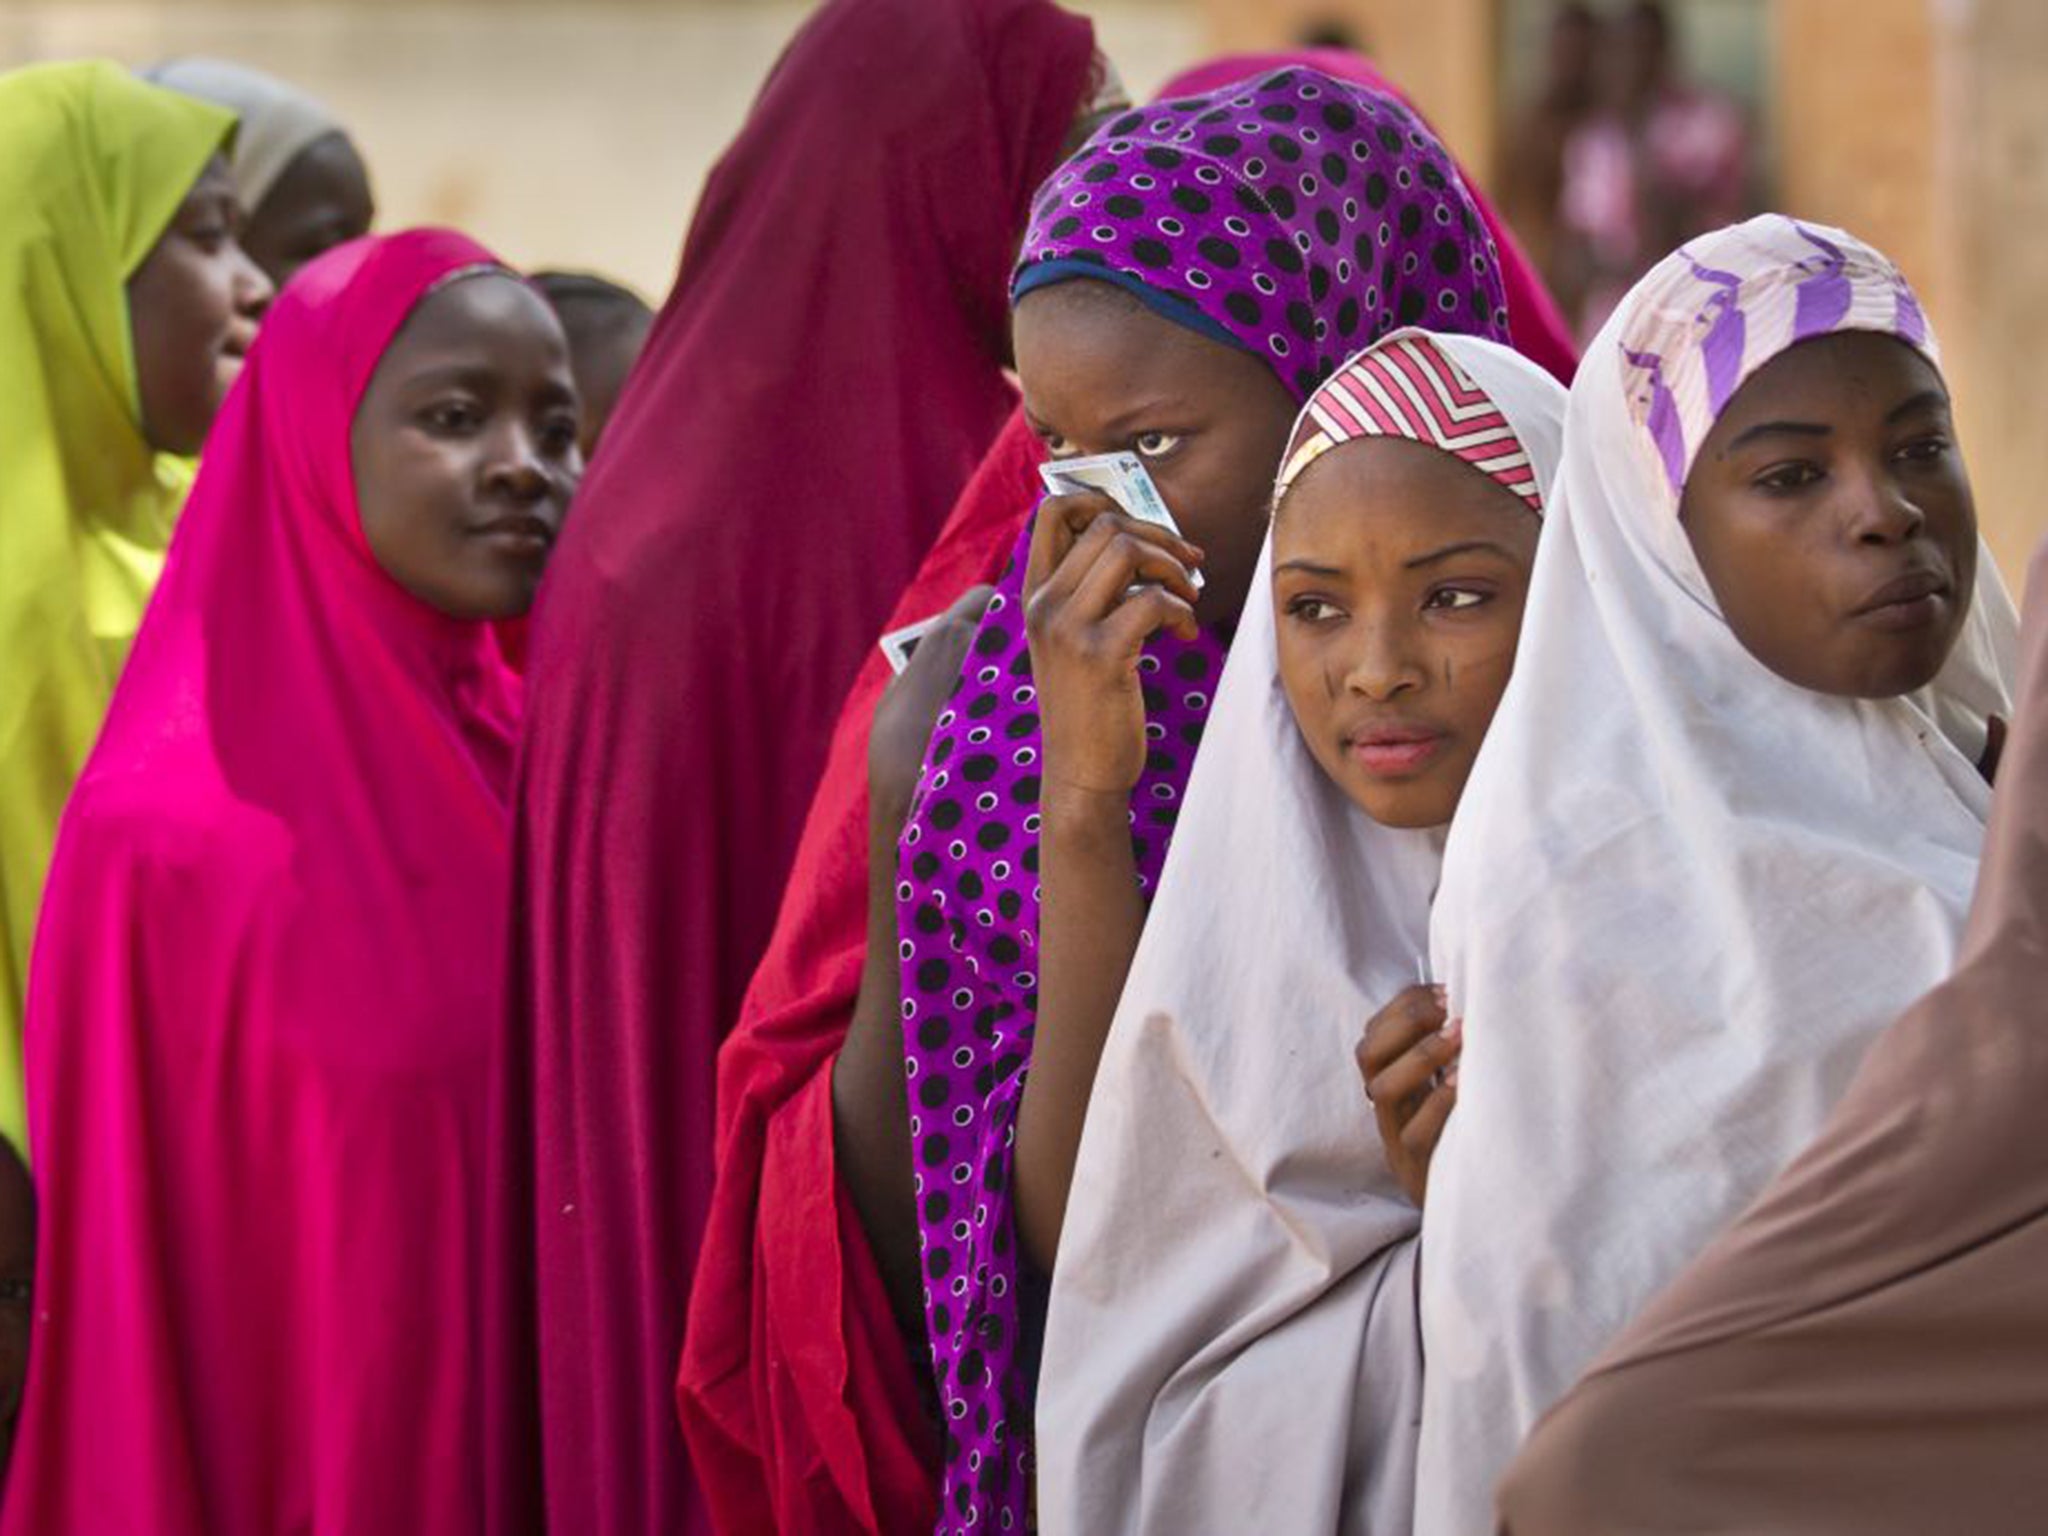 Women cast their vote in Daura, the home town of opposition candidate Muhammadu Buhari